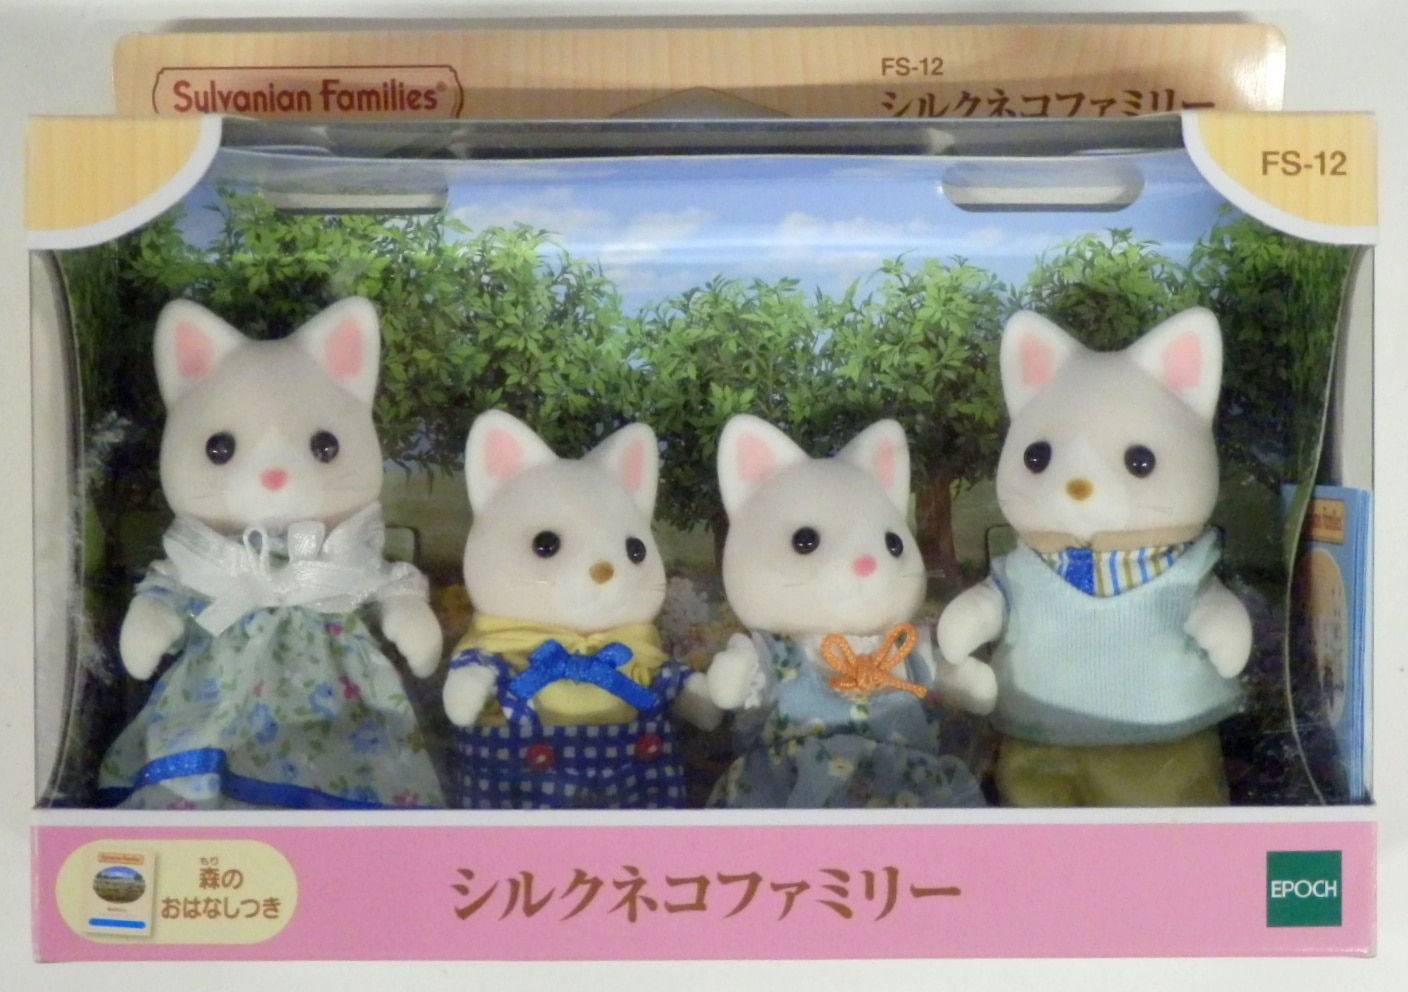 fumle nyhed marmelade Epoch Co Sylvanian Families (Calico Critters) FS-12 silk cat family |  Mandarake Online Shop